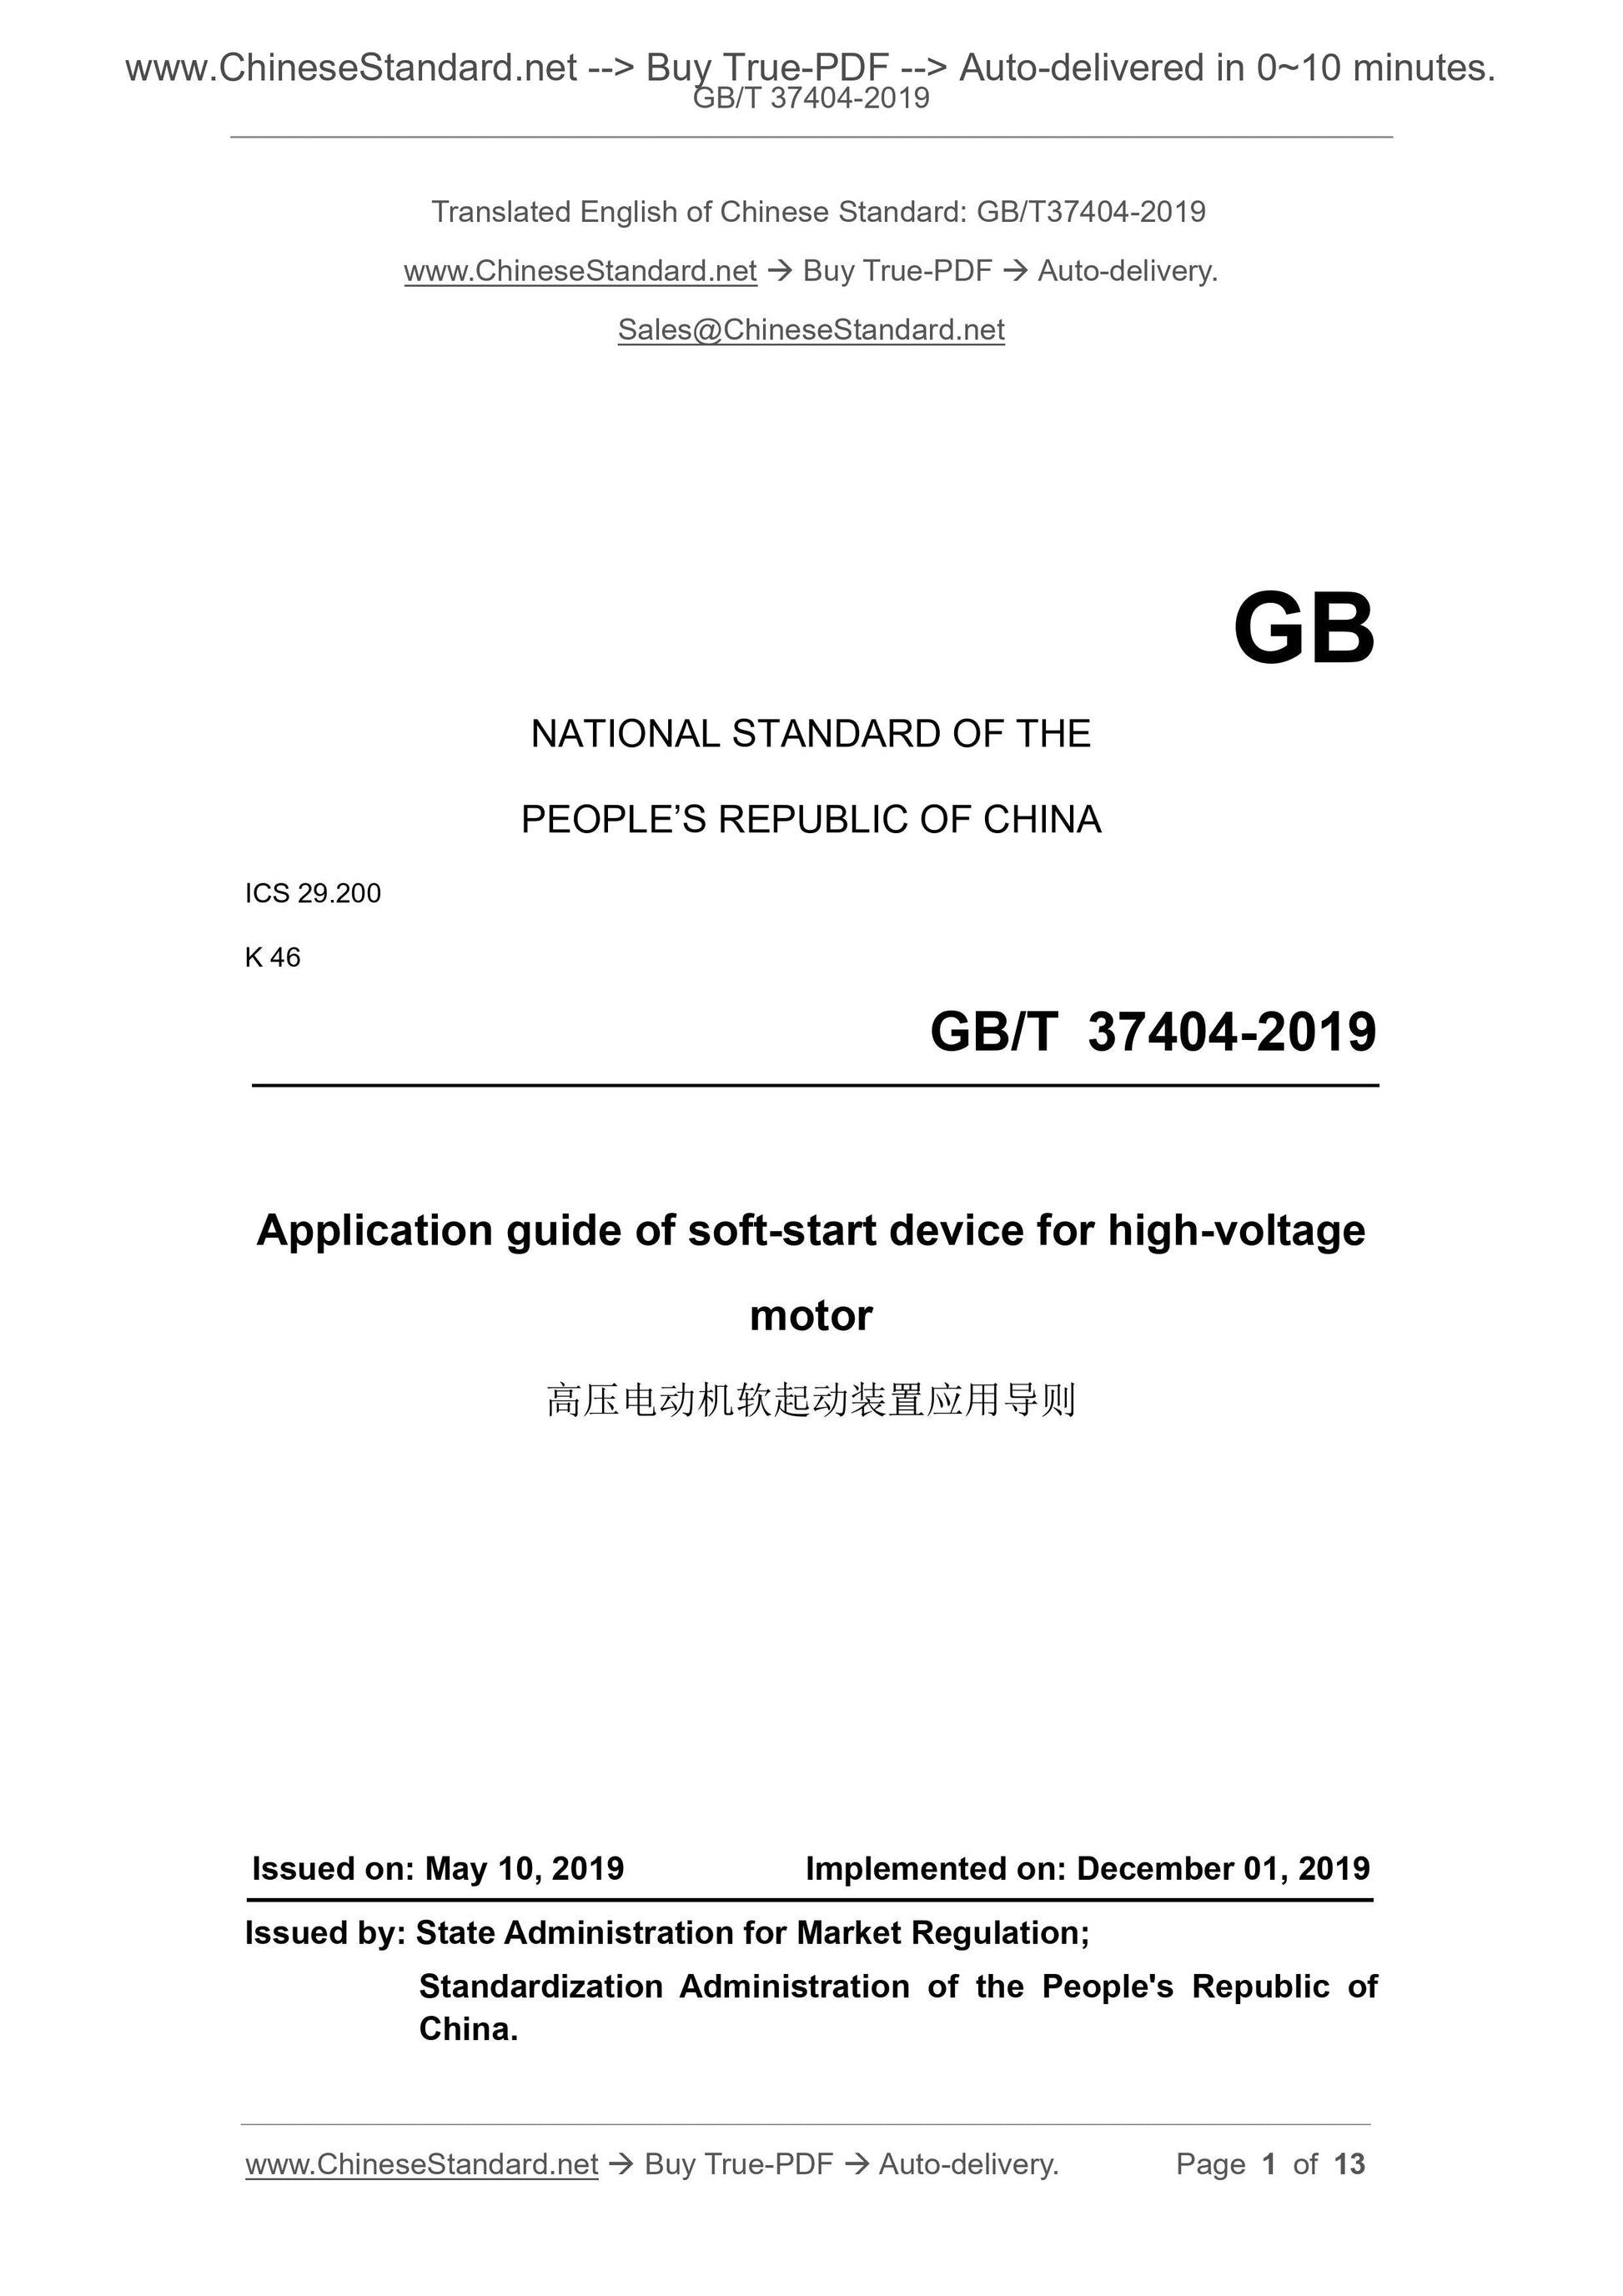 GB/T 37404-2019 Page 1